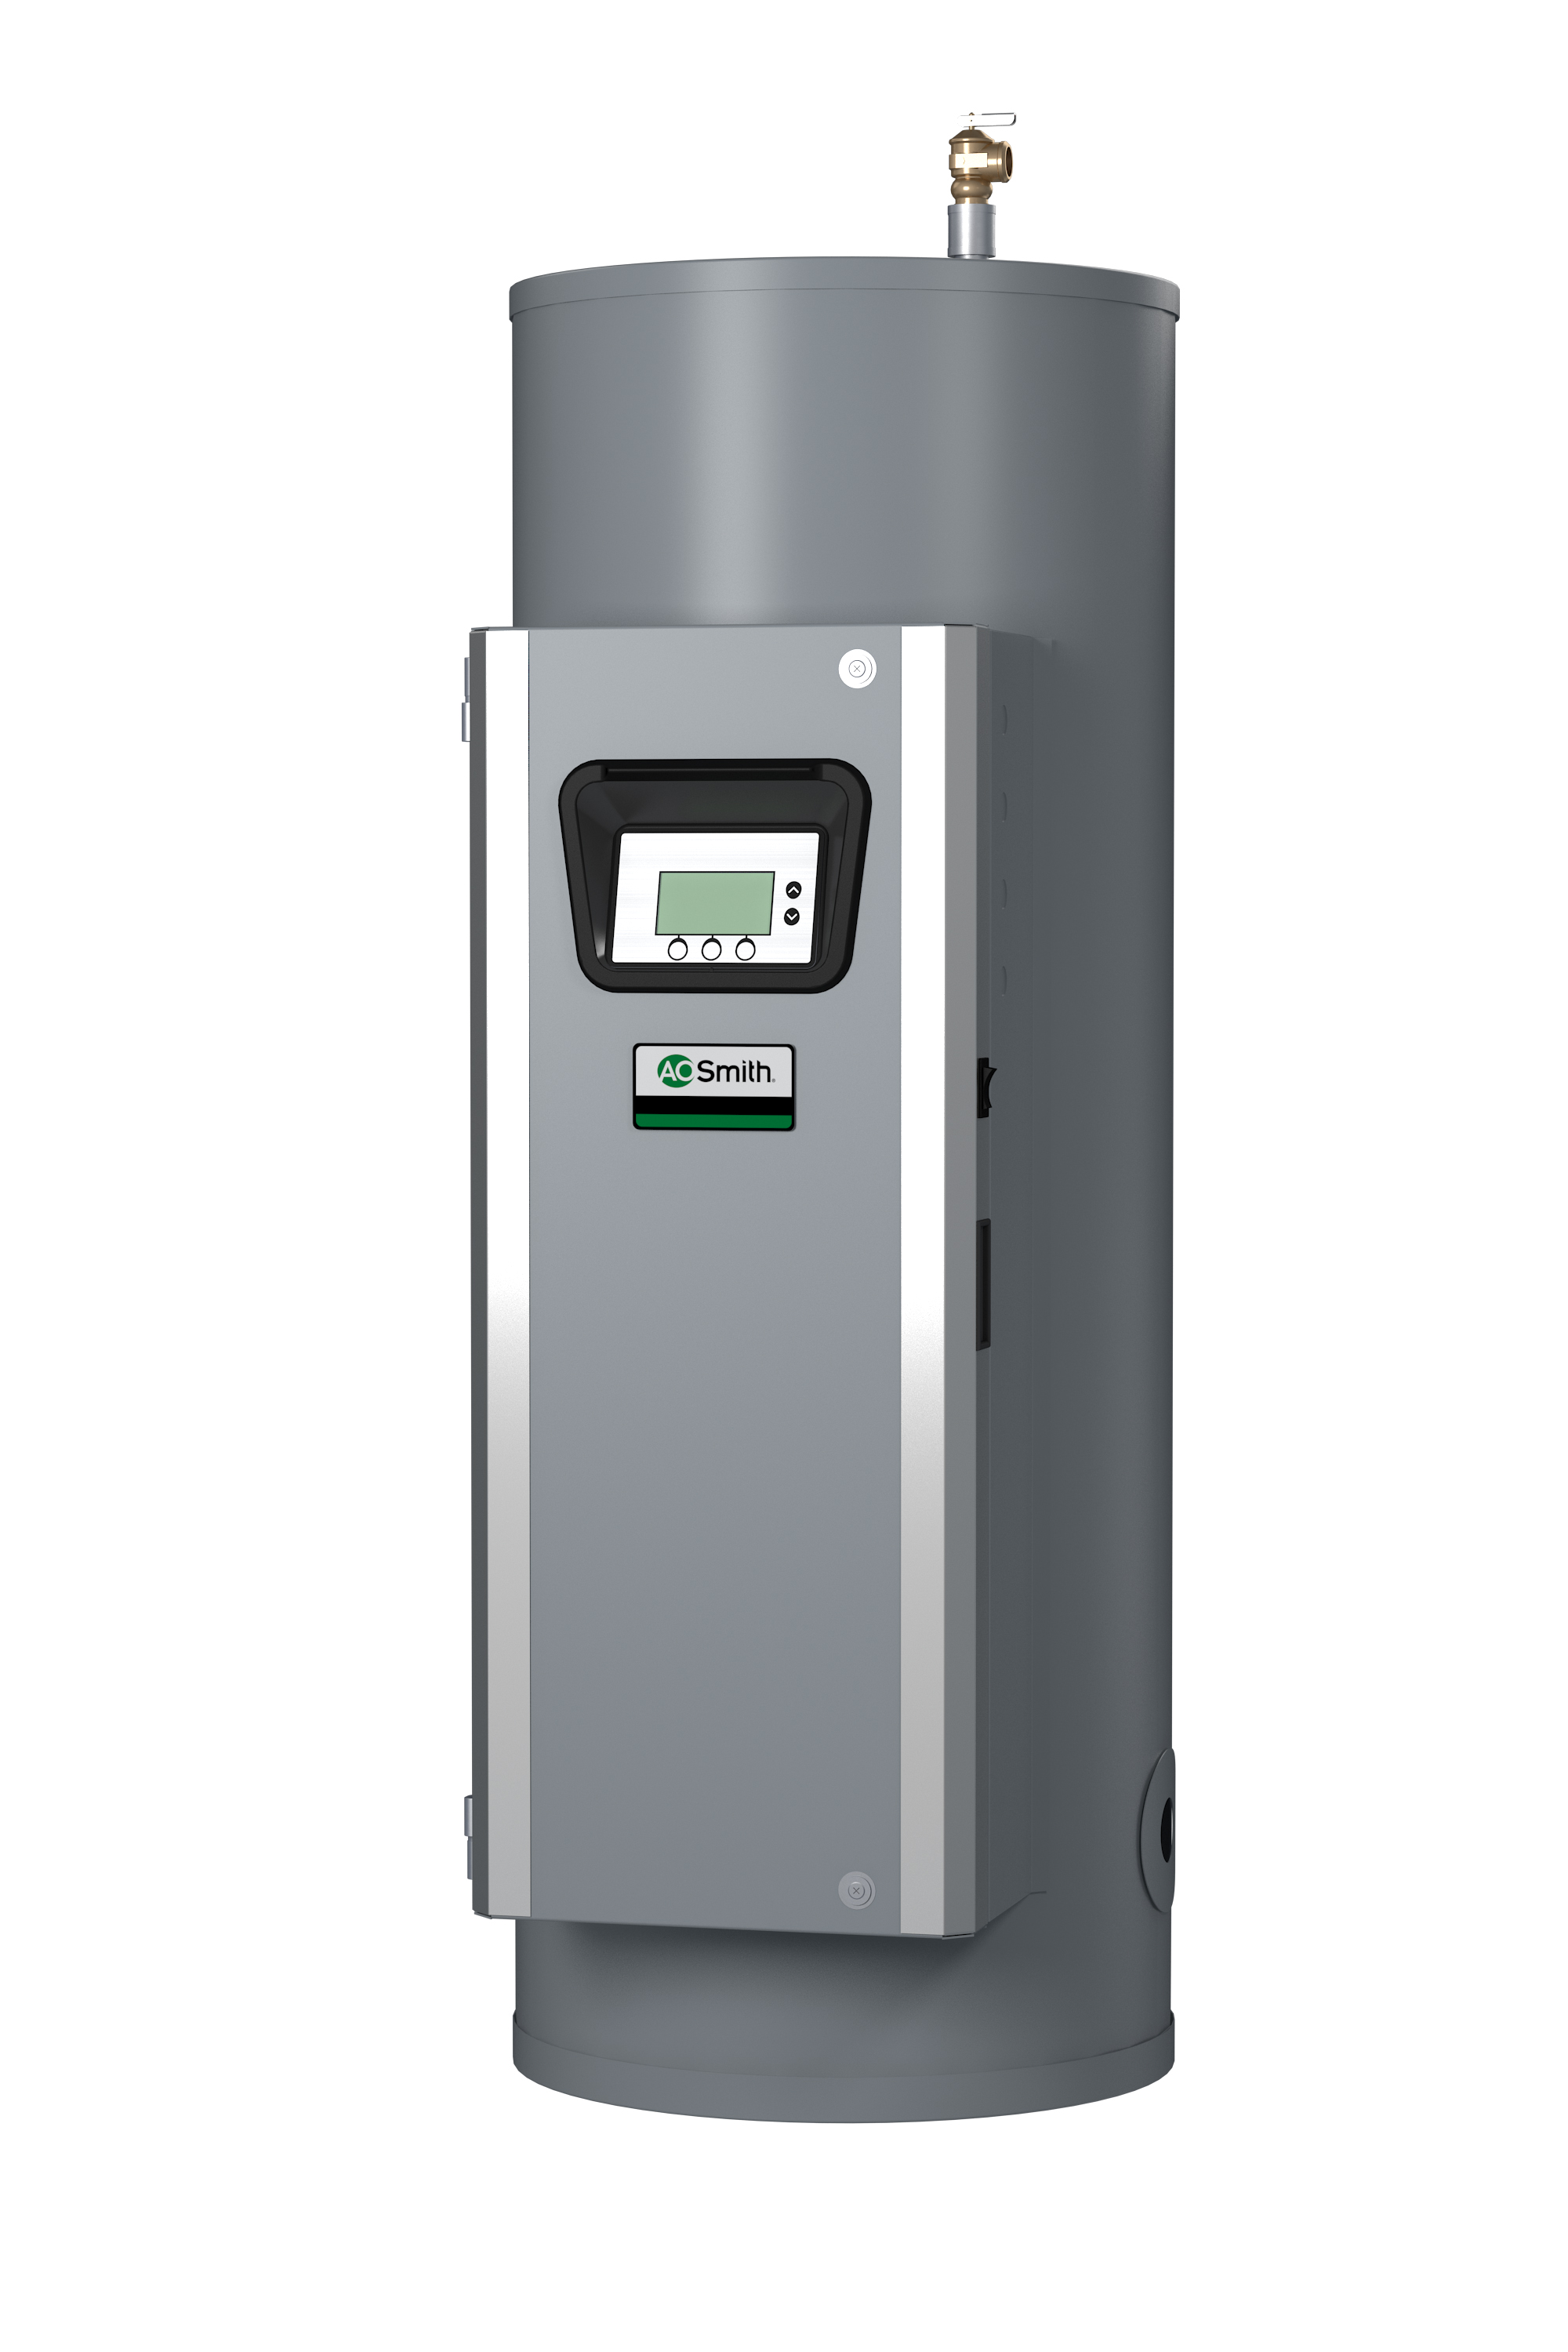 AO SMITH DSE-100A-24, 100 GALLONS, 24KW, 480 VOLT, 28.9 AMPS, 3 PHASE, 2 ELEMENTS, ASME CUSTOM Xi SERIES HEAVY DUTY COMMERCIAL ELECTRIC WATER HEATER